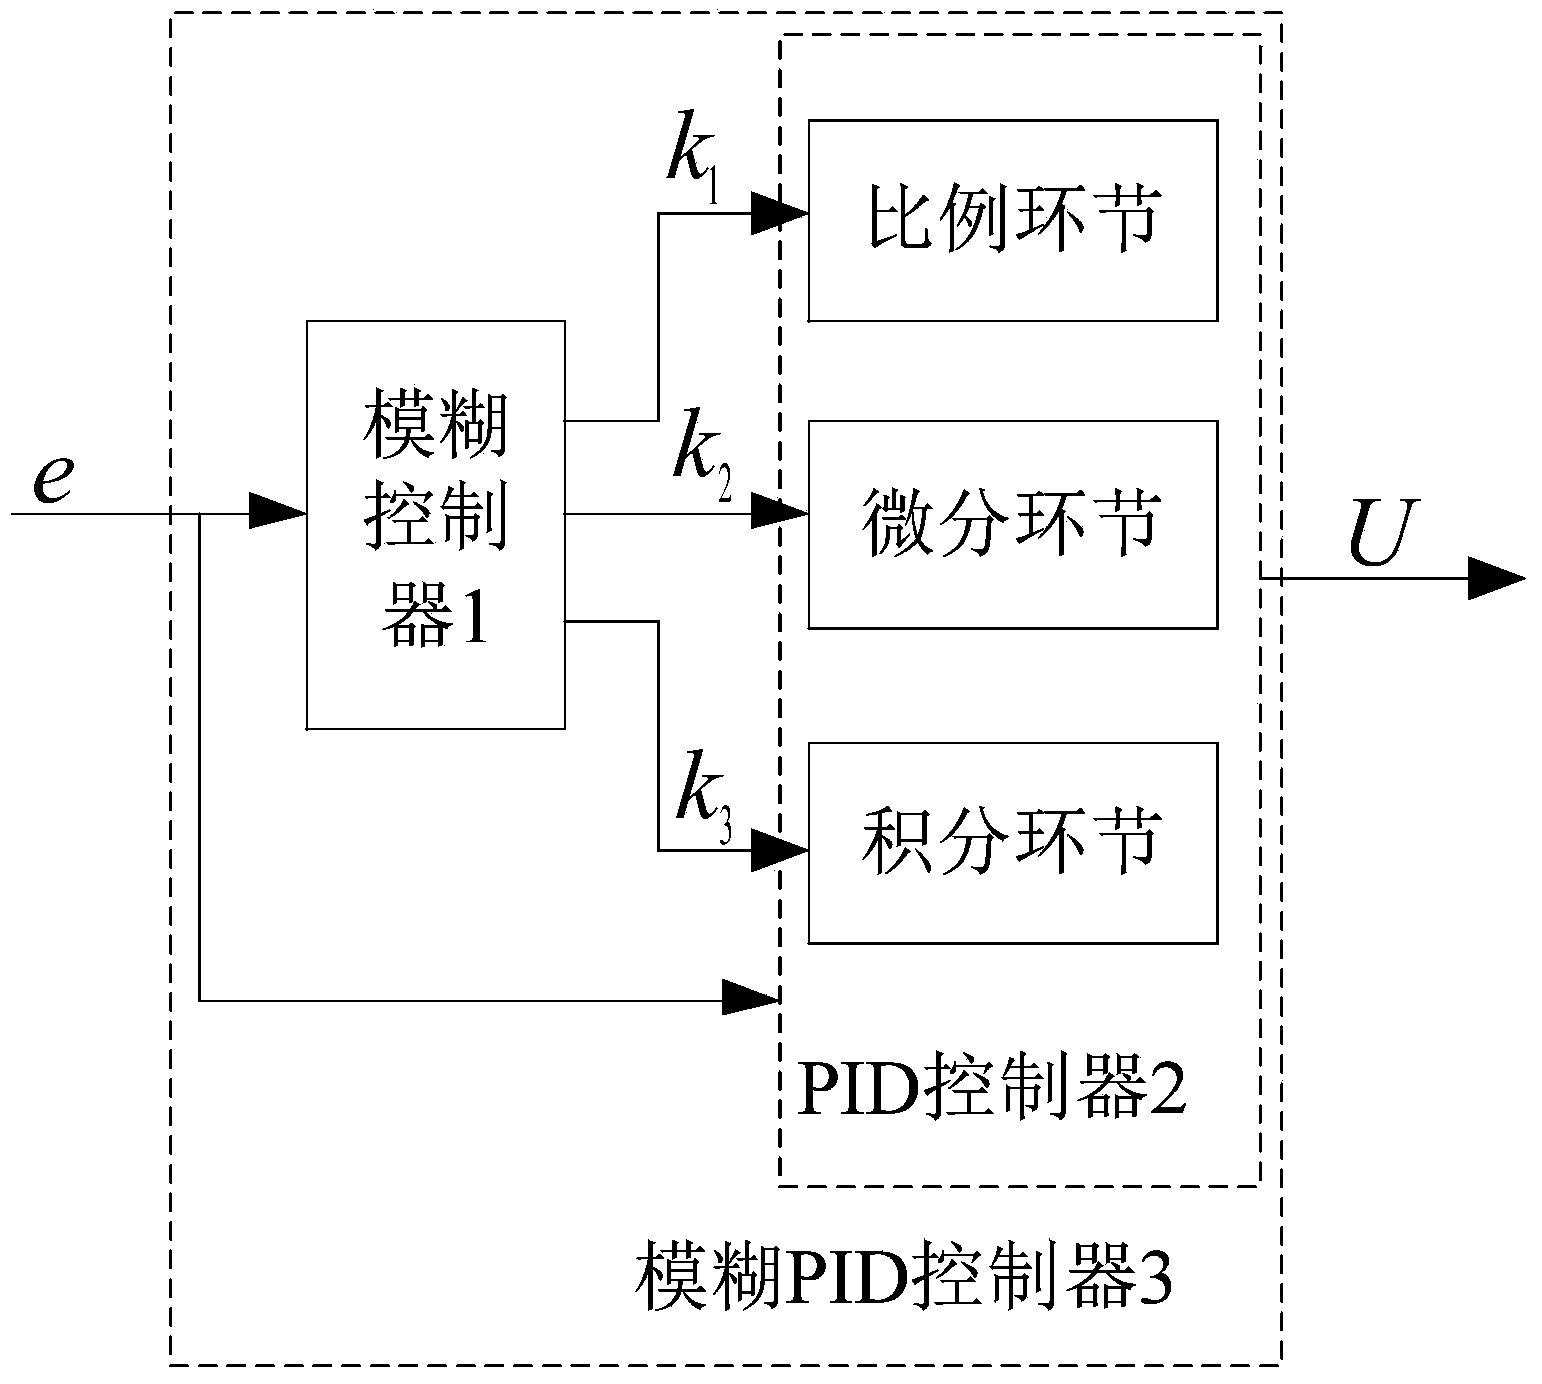 Parameter self-tuning method for fuzzy PID controller